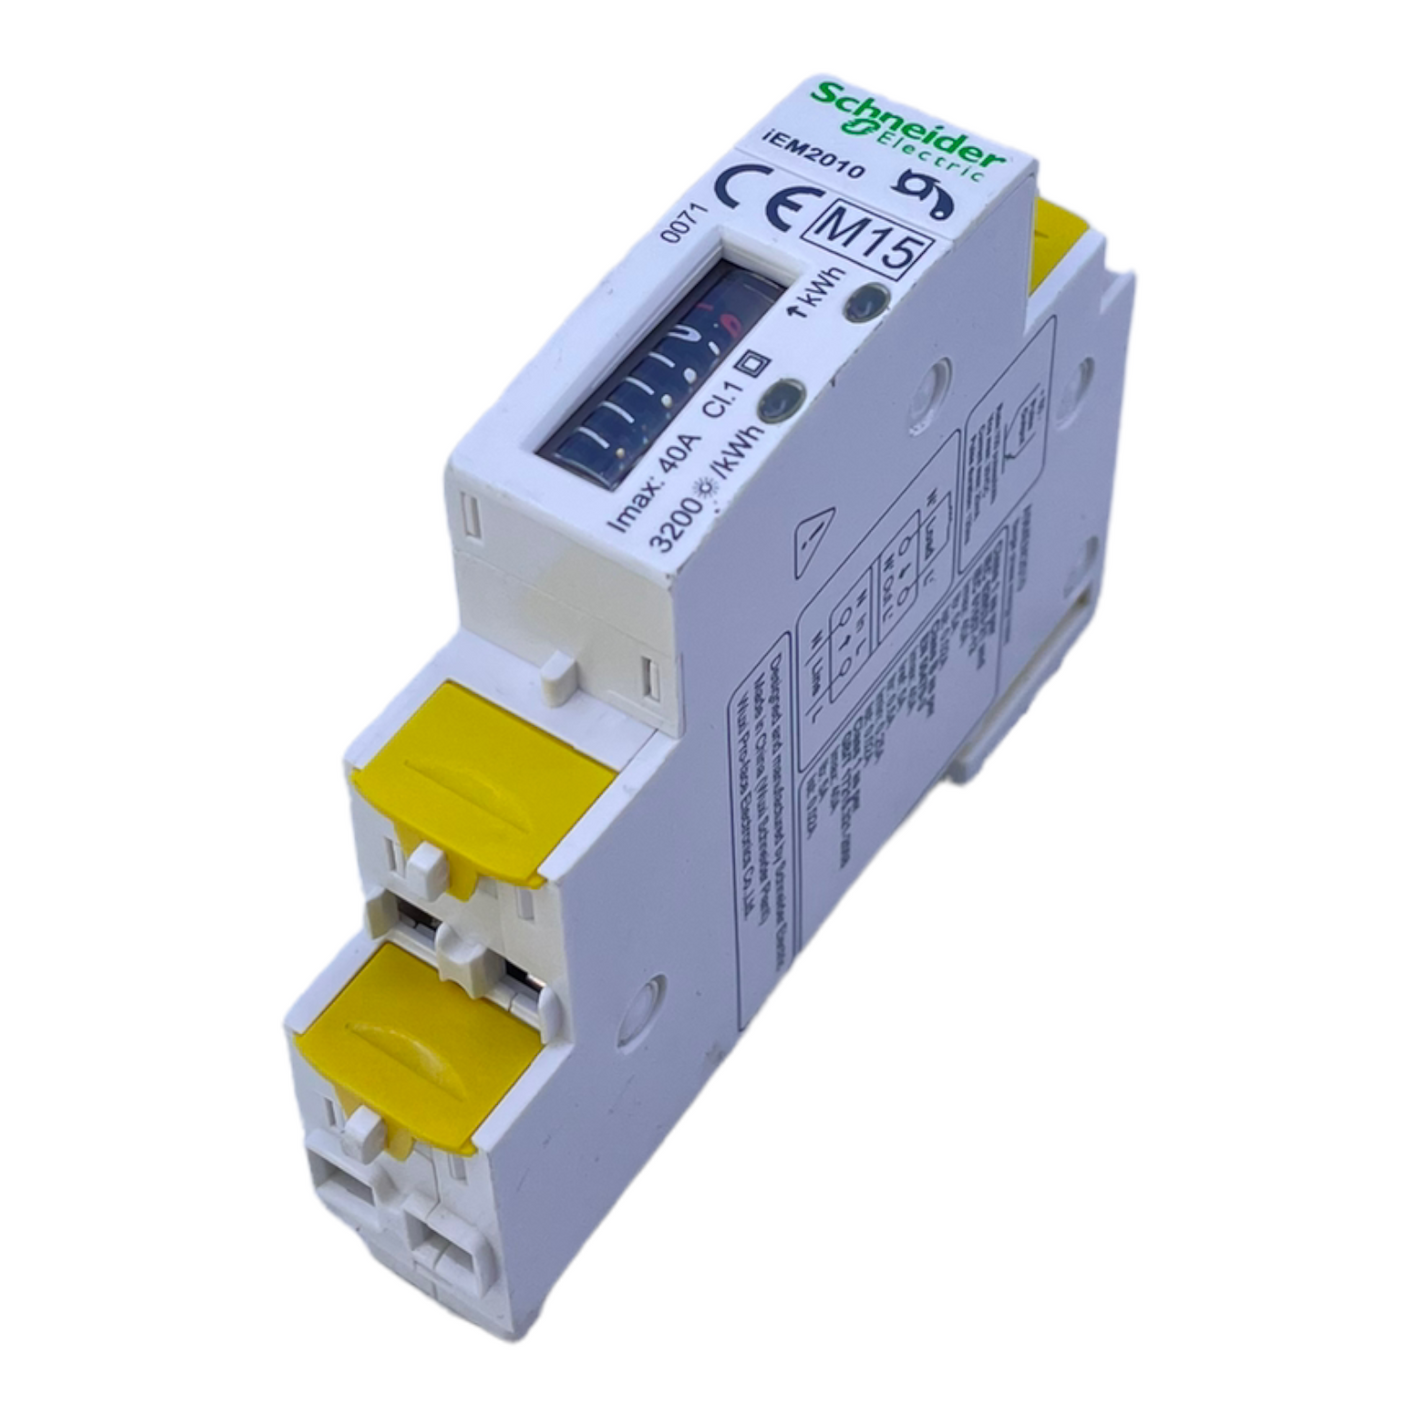 Schneider Electric iEM2010 single-phase energy meter for industrial use 